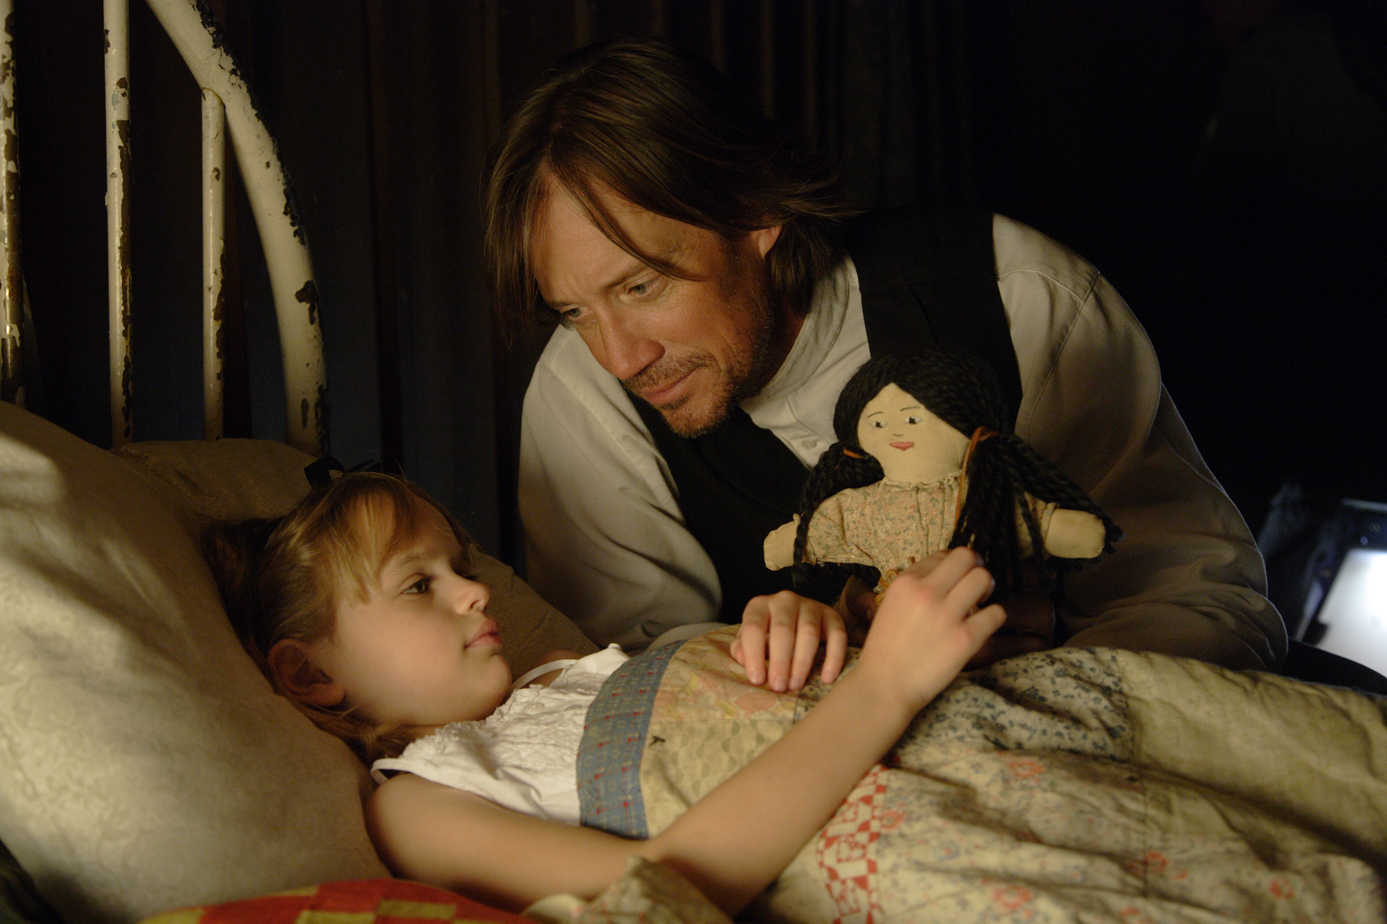 Joey King and Kevin Sorbo, 